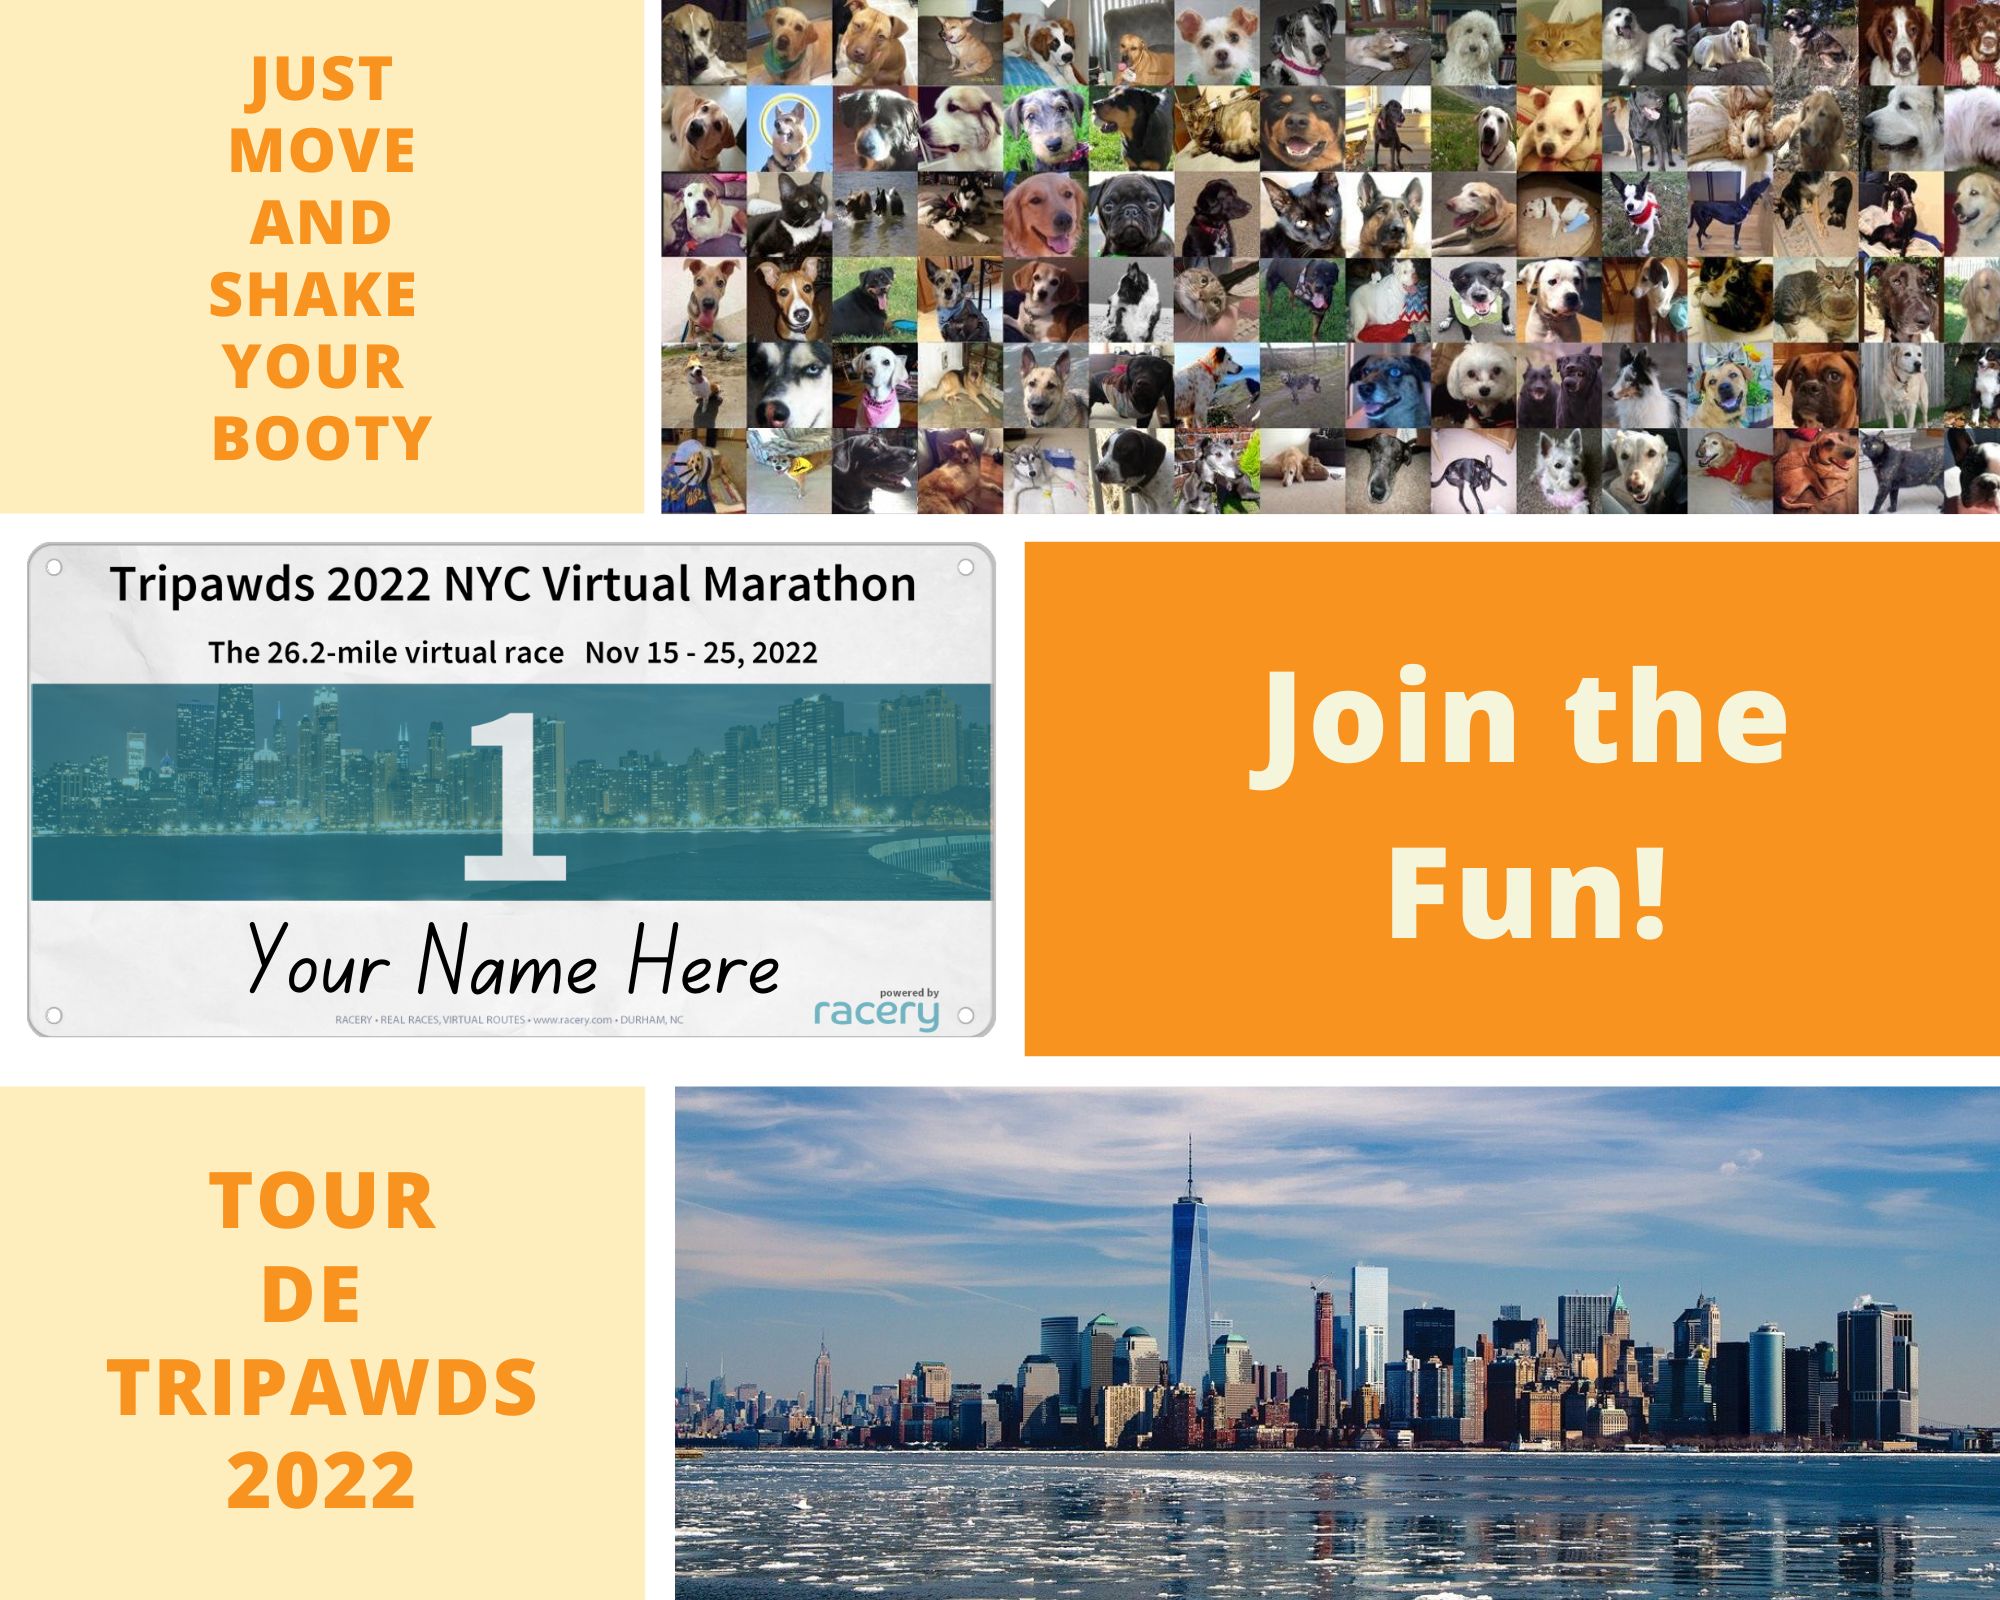 Register for the 2022 Tripawds Virtual Race